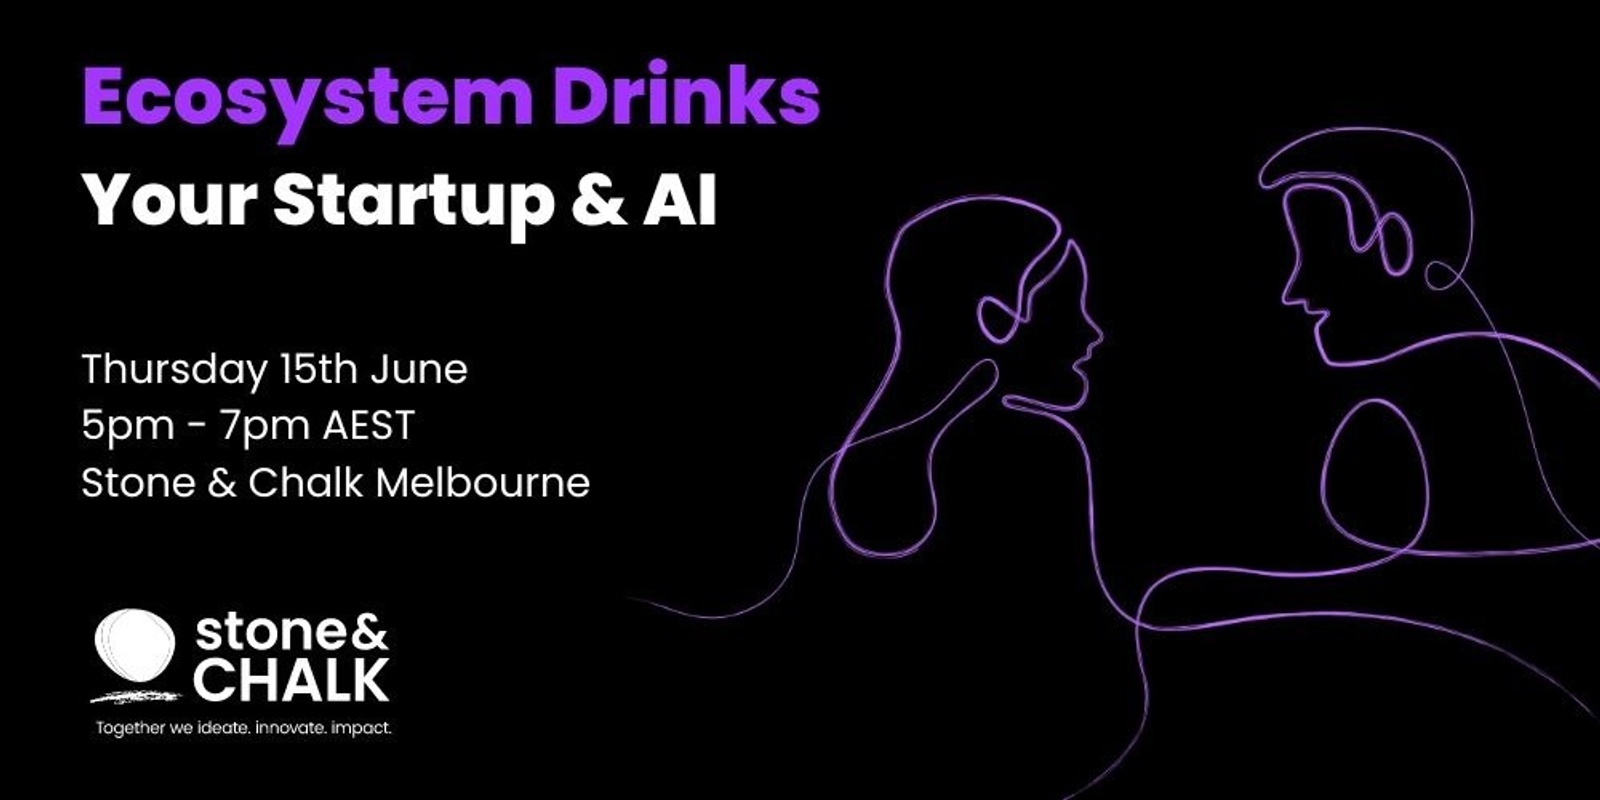 Stone & Chalk's Ecosystem Drinks: Your Startup & AI